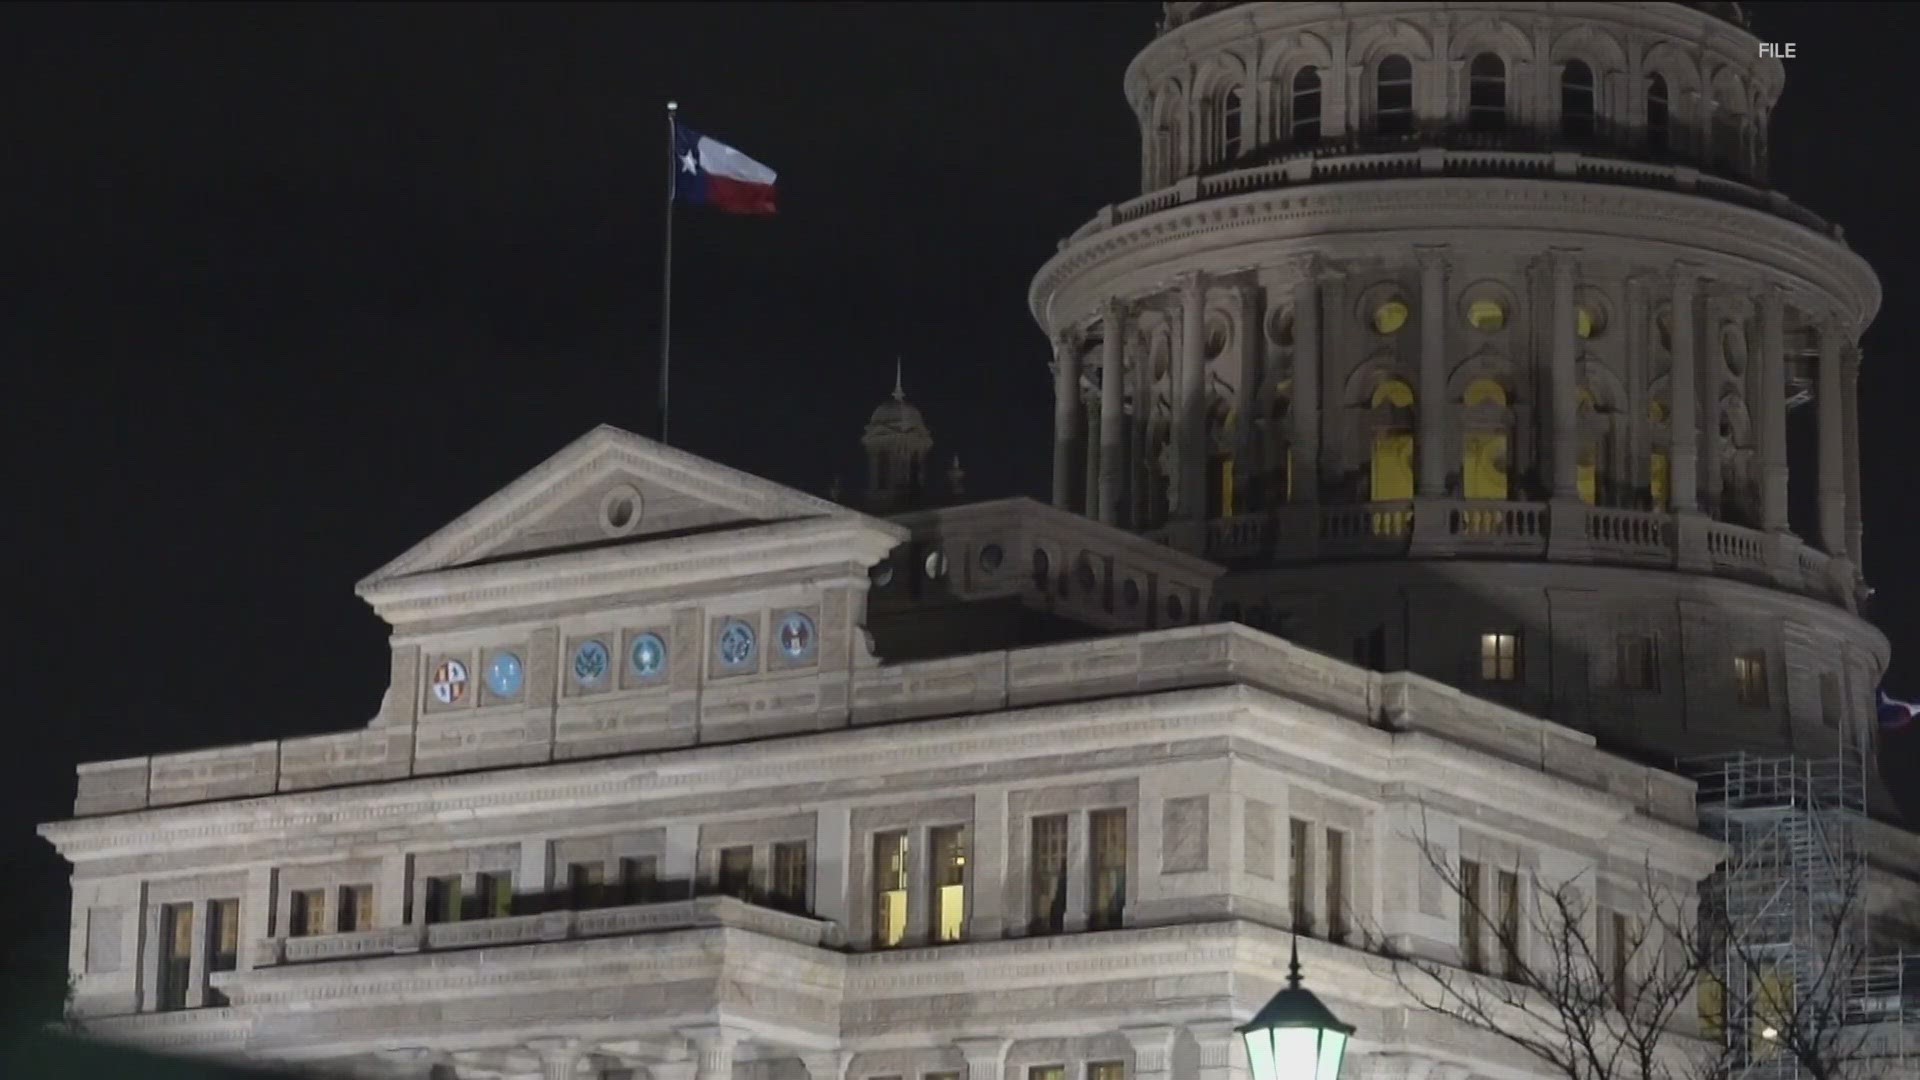 A new Texas House committee is going to look into advancements in artificial intelligence and other emerging technologies.